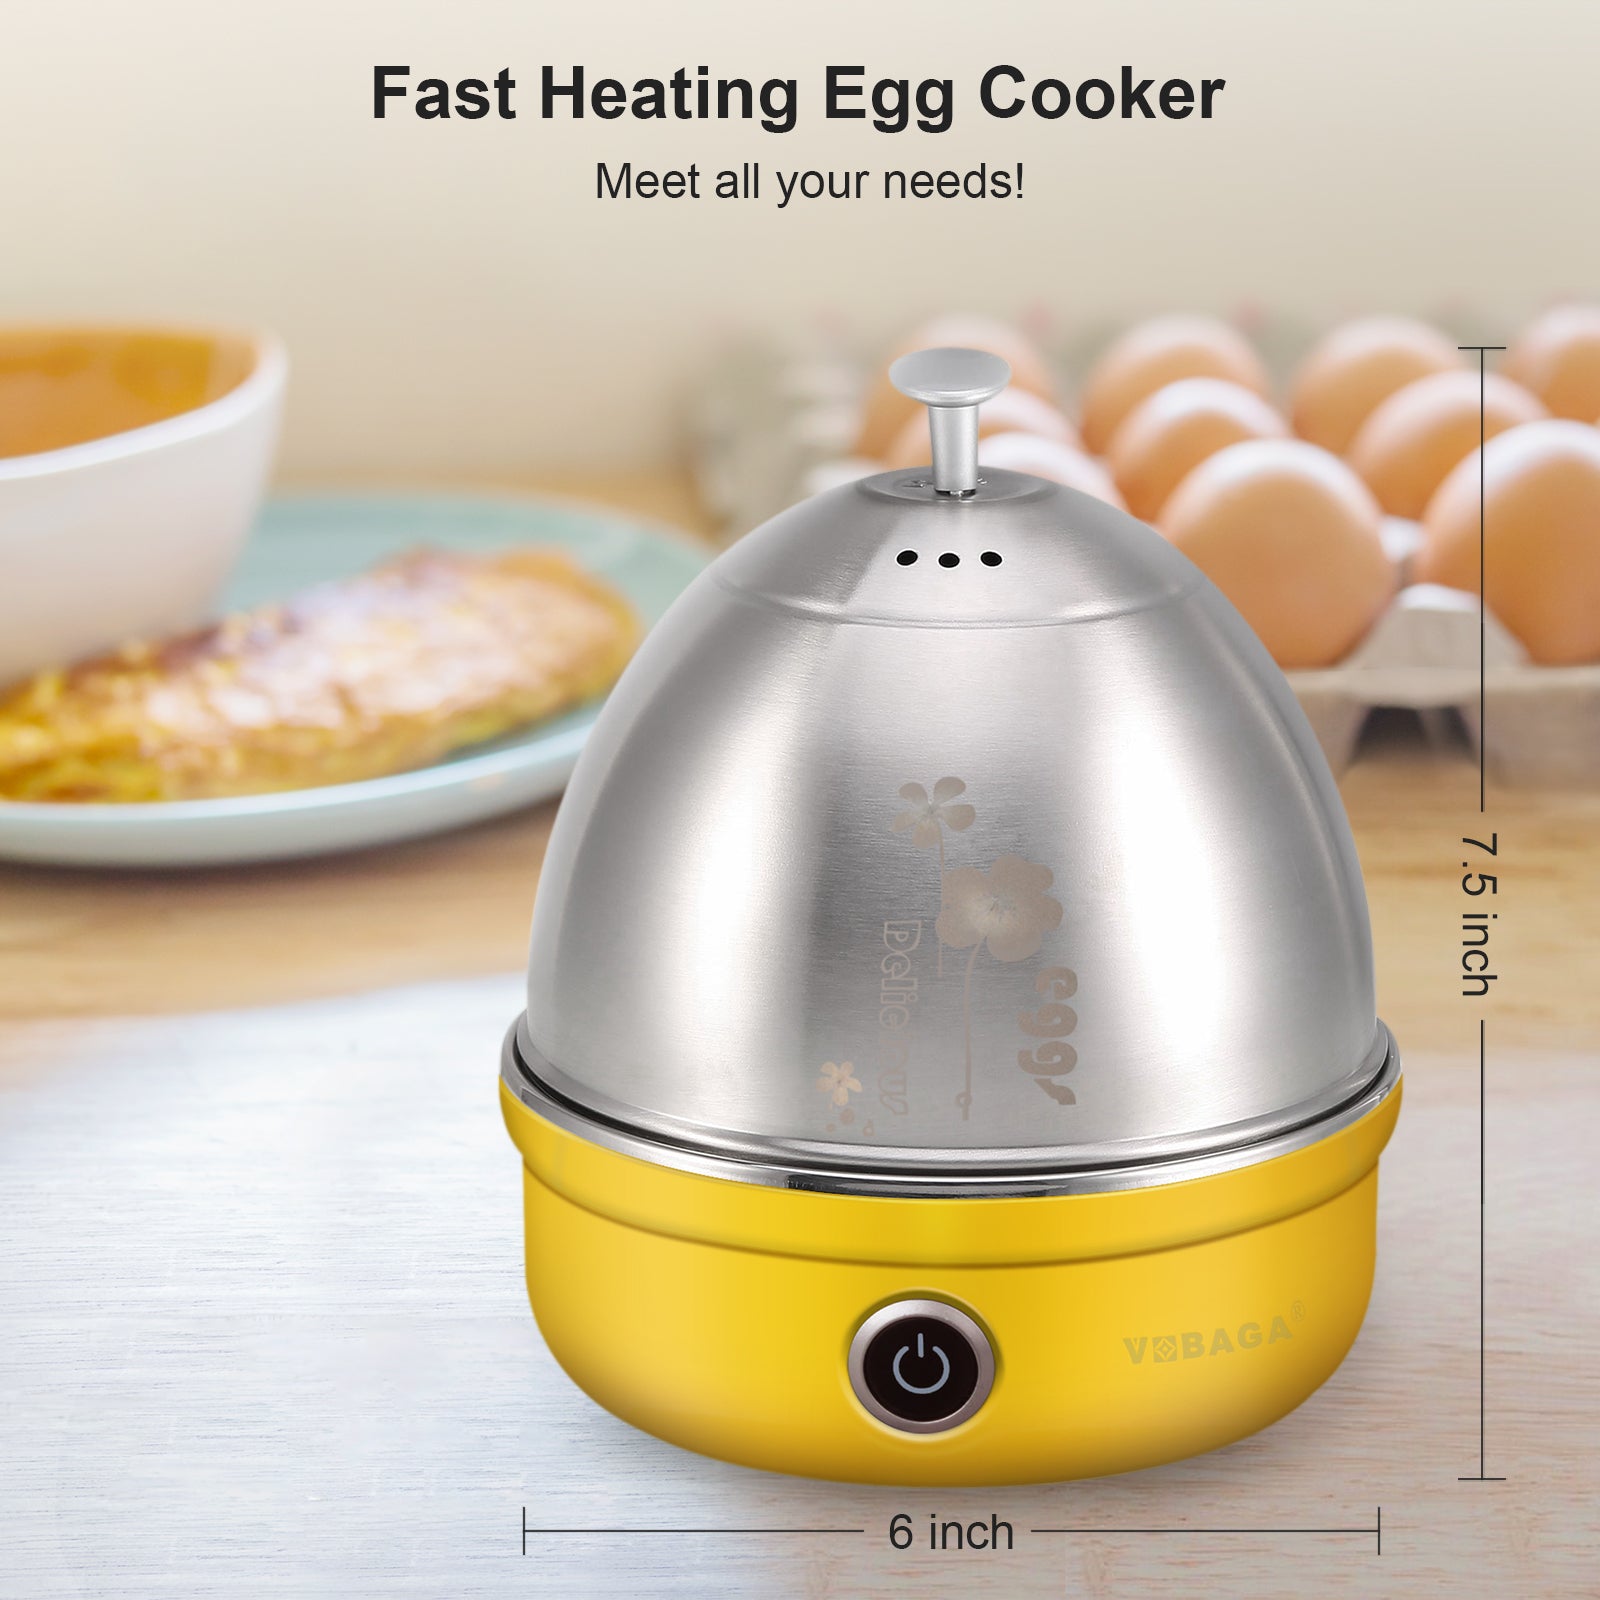 VOBAGA Electric Egg Cooker, Rapid Egg Boiler with Auto Shut Off for Soft, Hard Boiled, Steamed Eggs (Yellow)